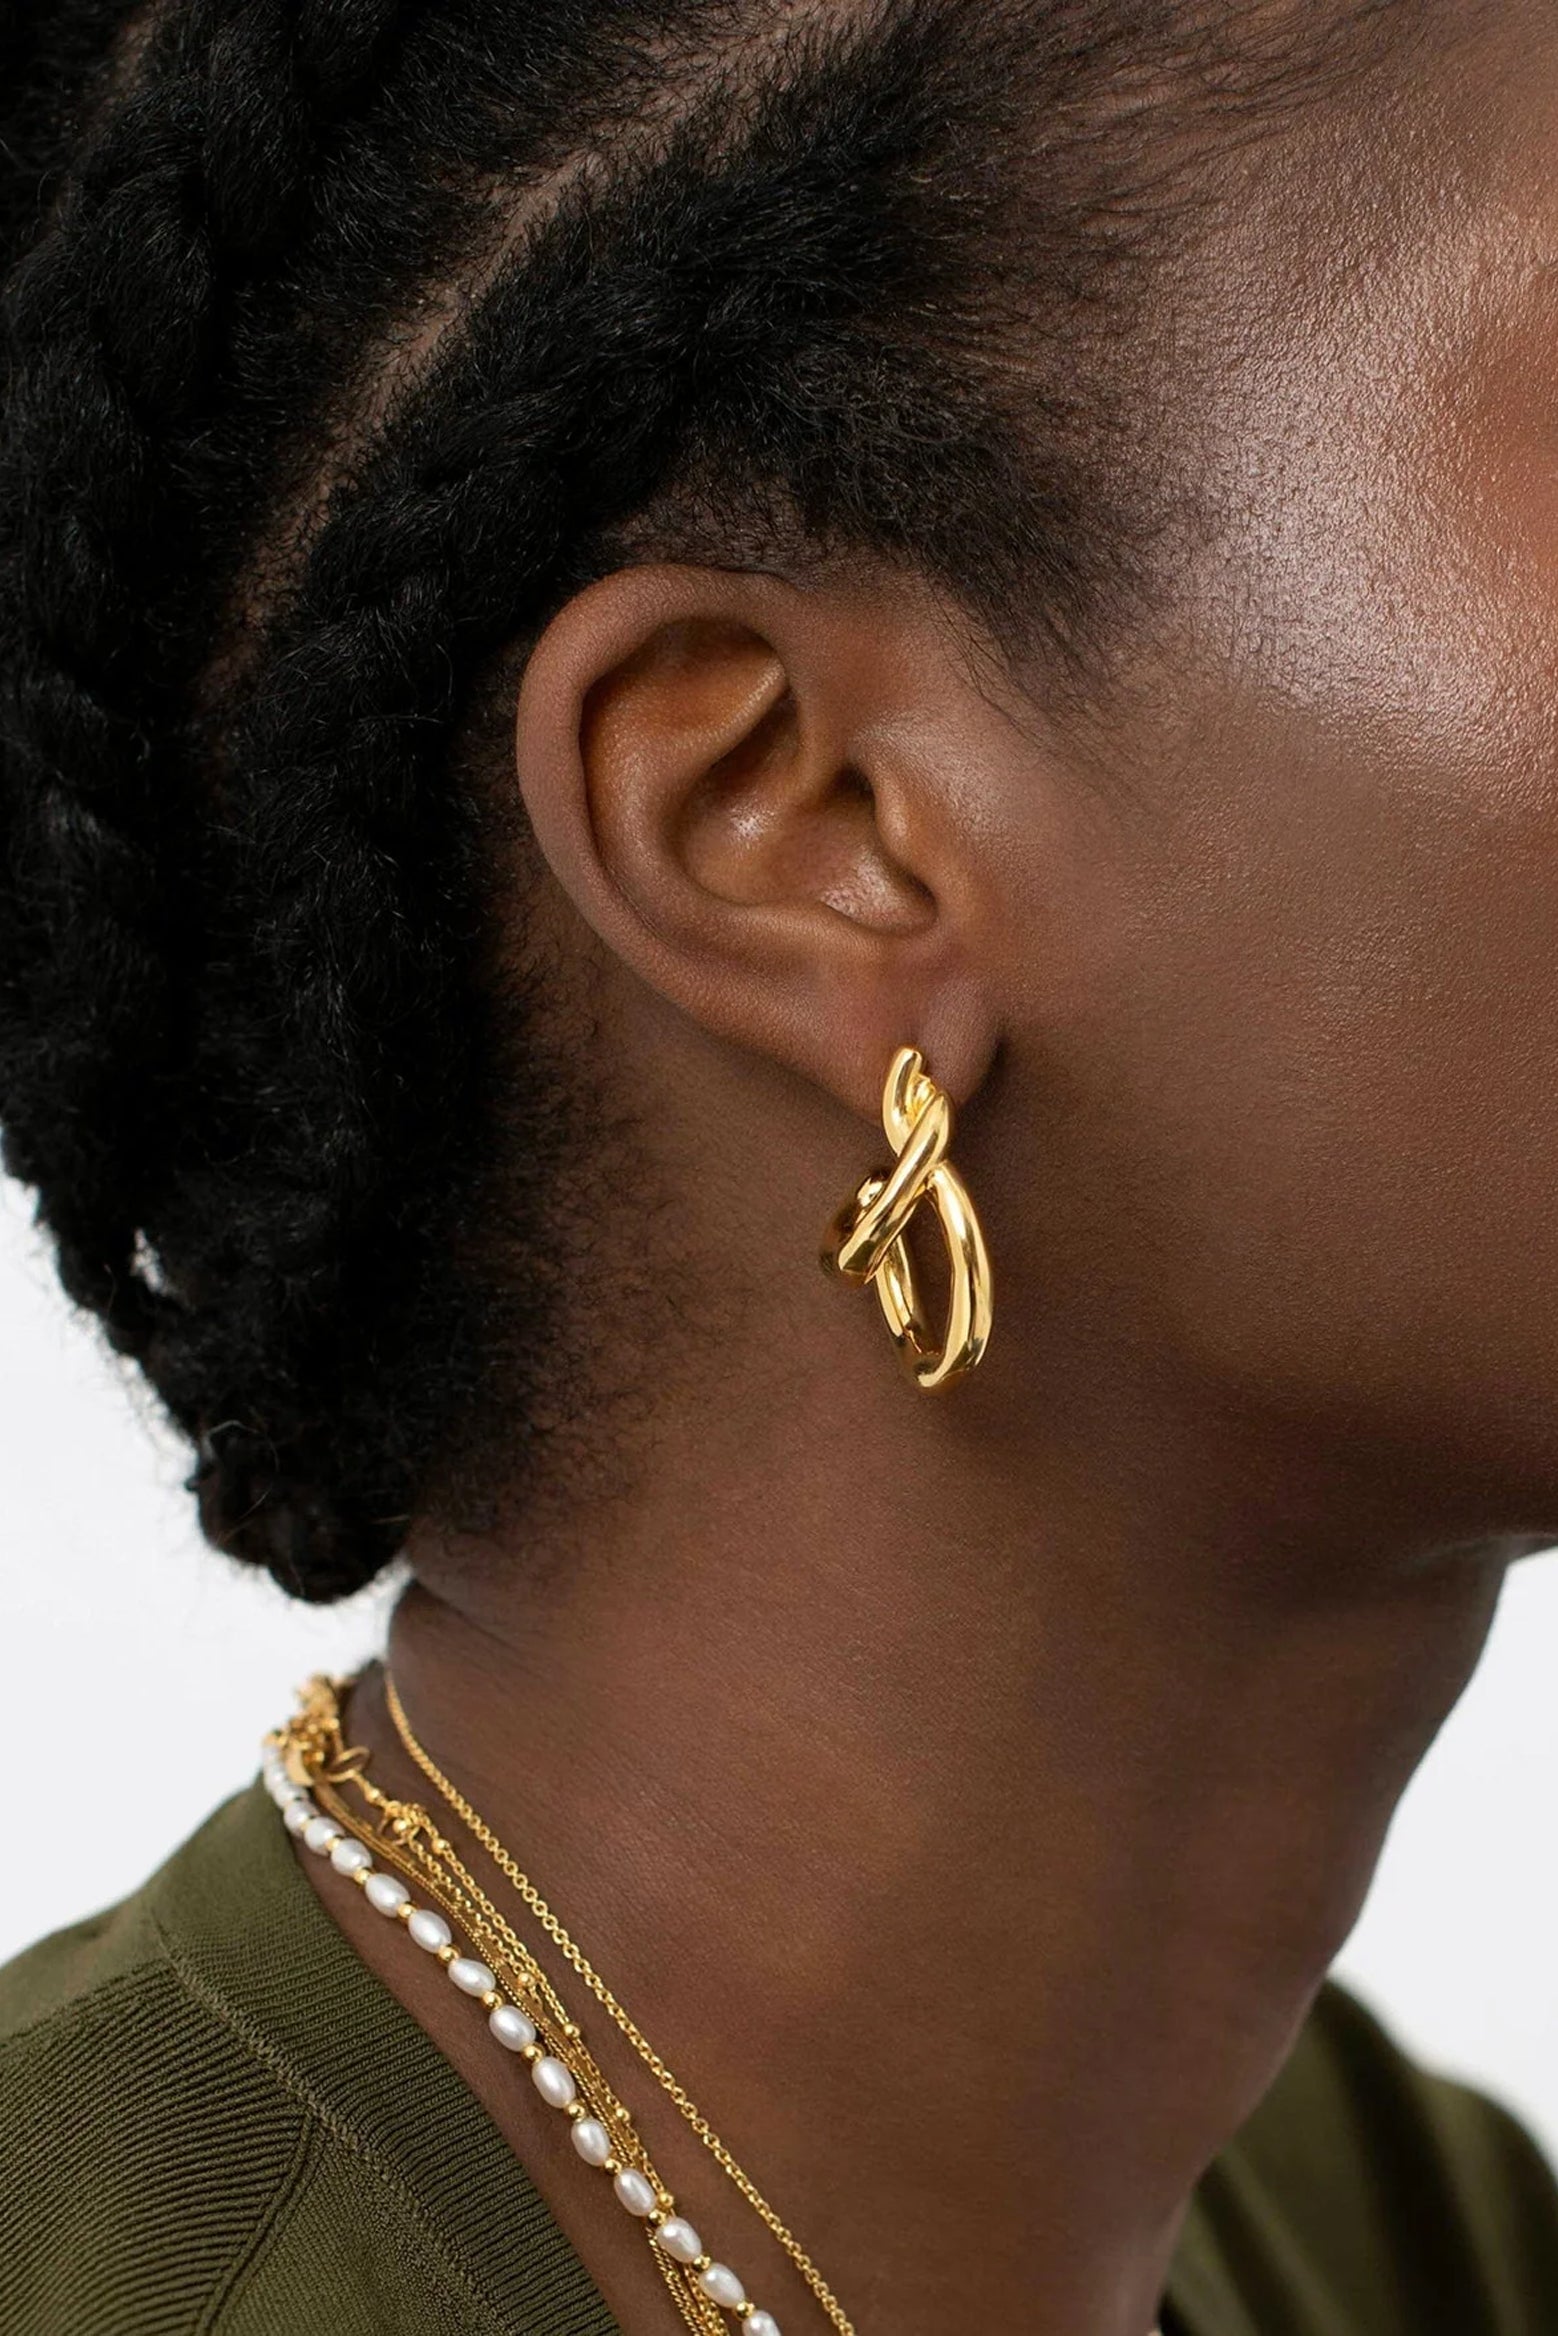 The Missoma Molten Twisted Double Hoop Earrings in Gold available from The New Trend Australia